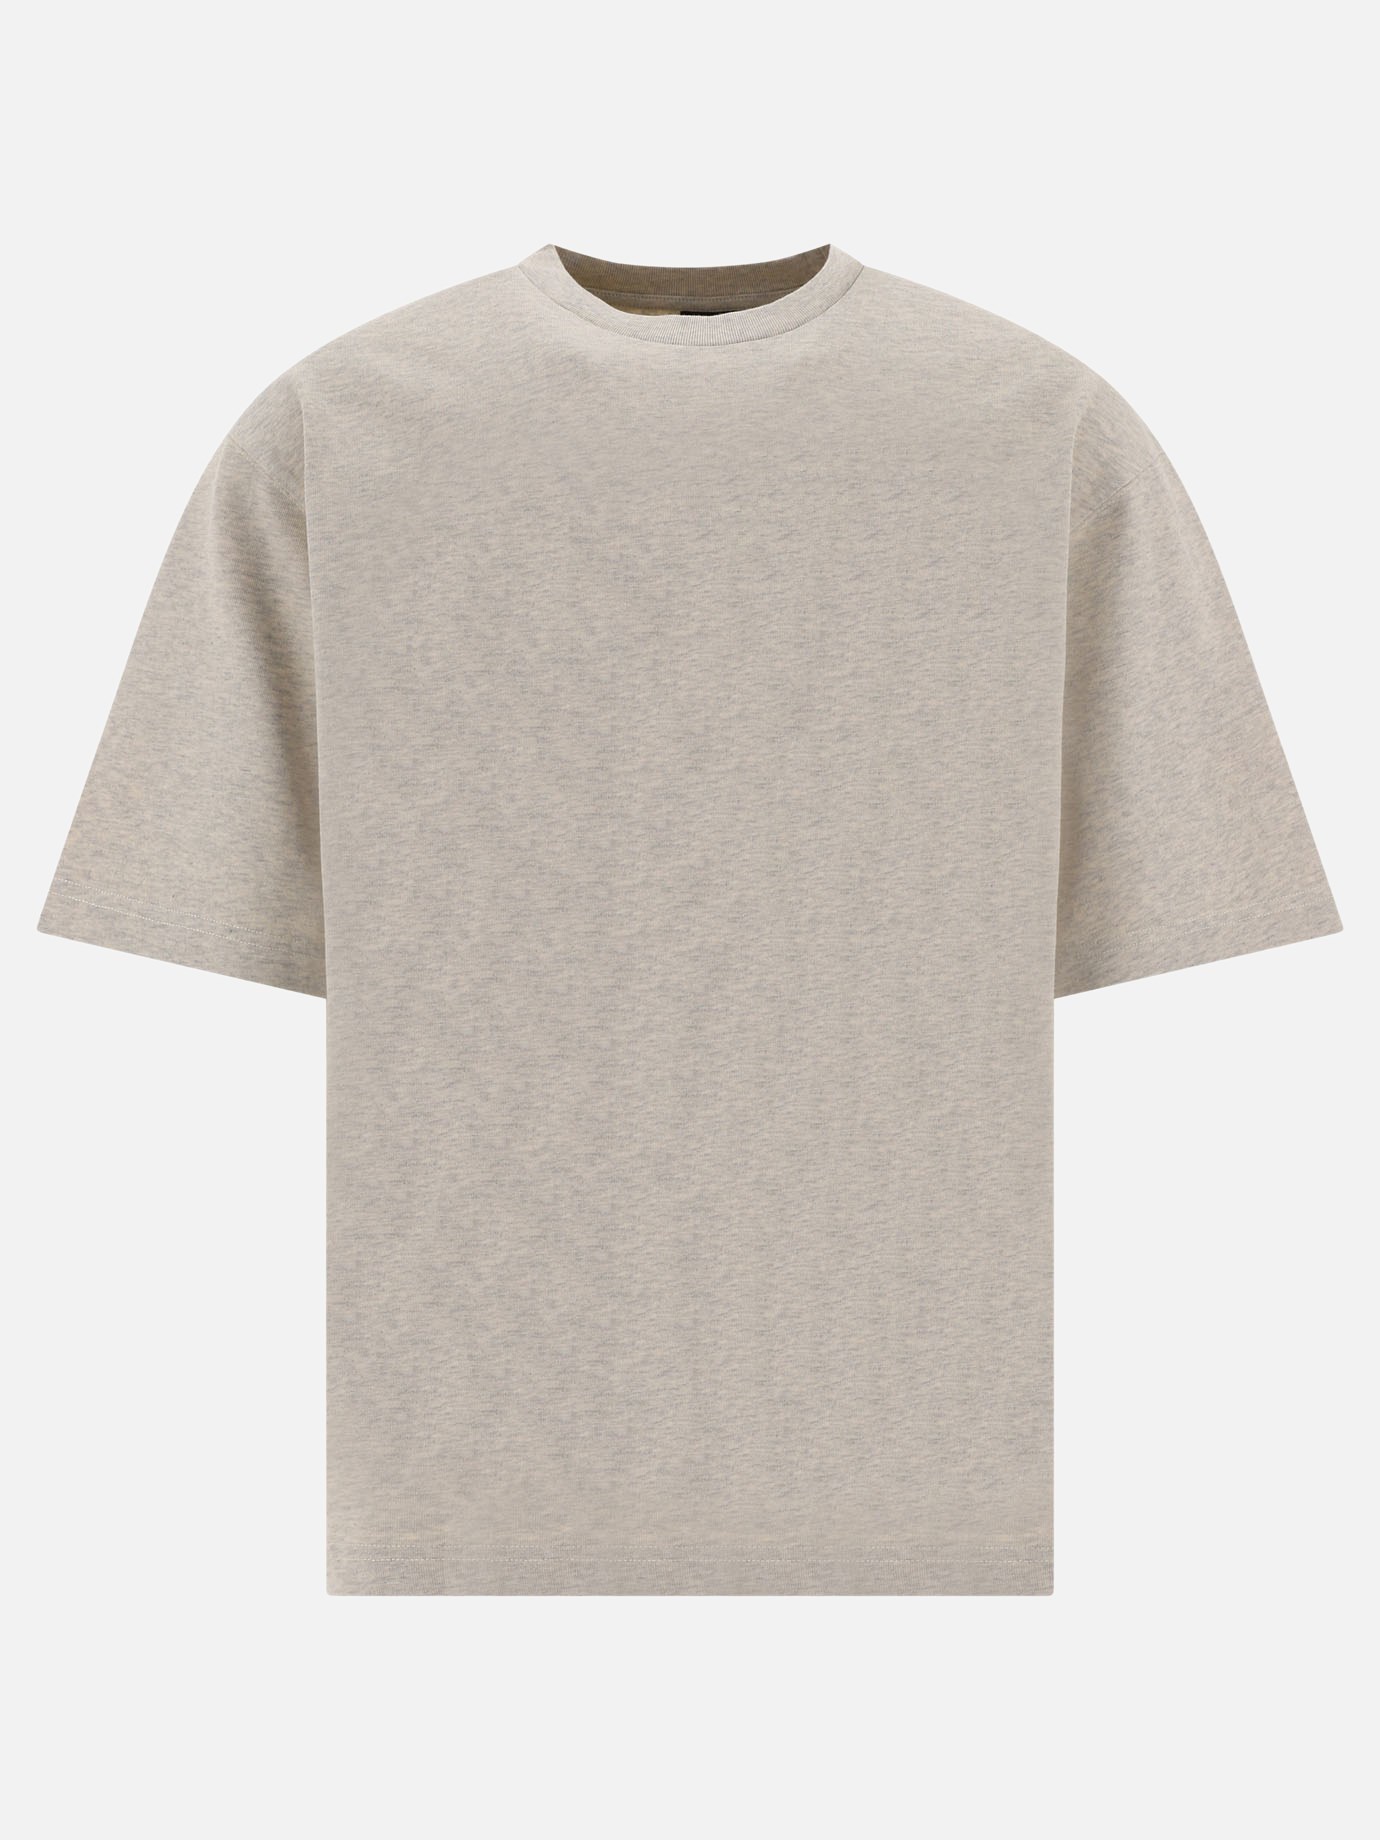 T-shirt  Le T-shirt Crabe by Jacquemus - 3